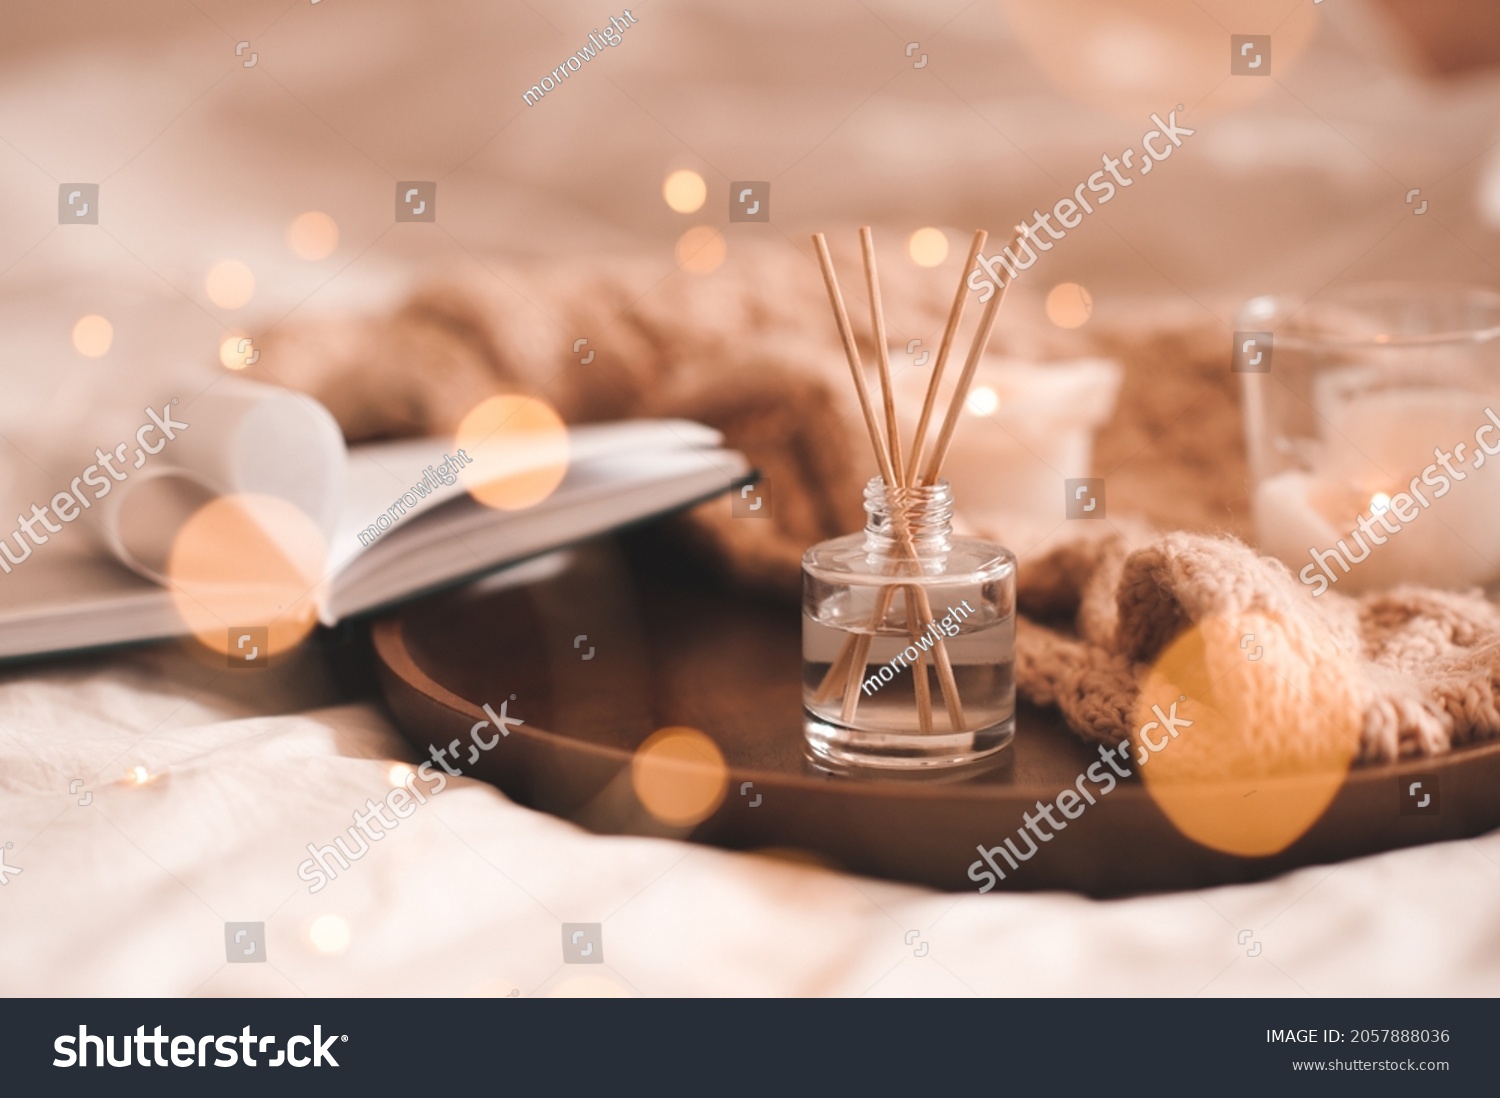 Home perfume in glass bottle with wood sticks, scented burn candles, open paper book and knit wool textile on ray in bedroom close up. Aromatherapy cozy atmosphere lifestyle. Winter warm xmas season.  #2057888036